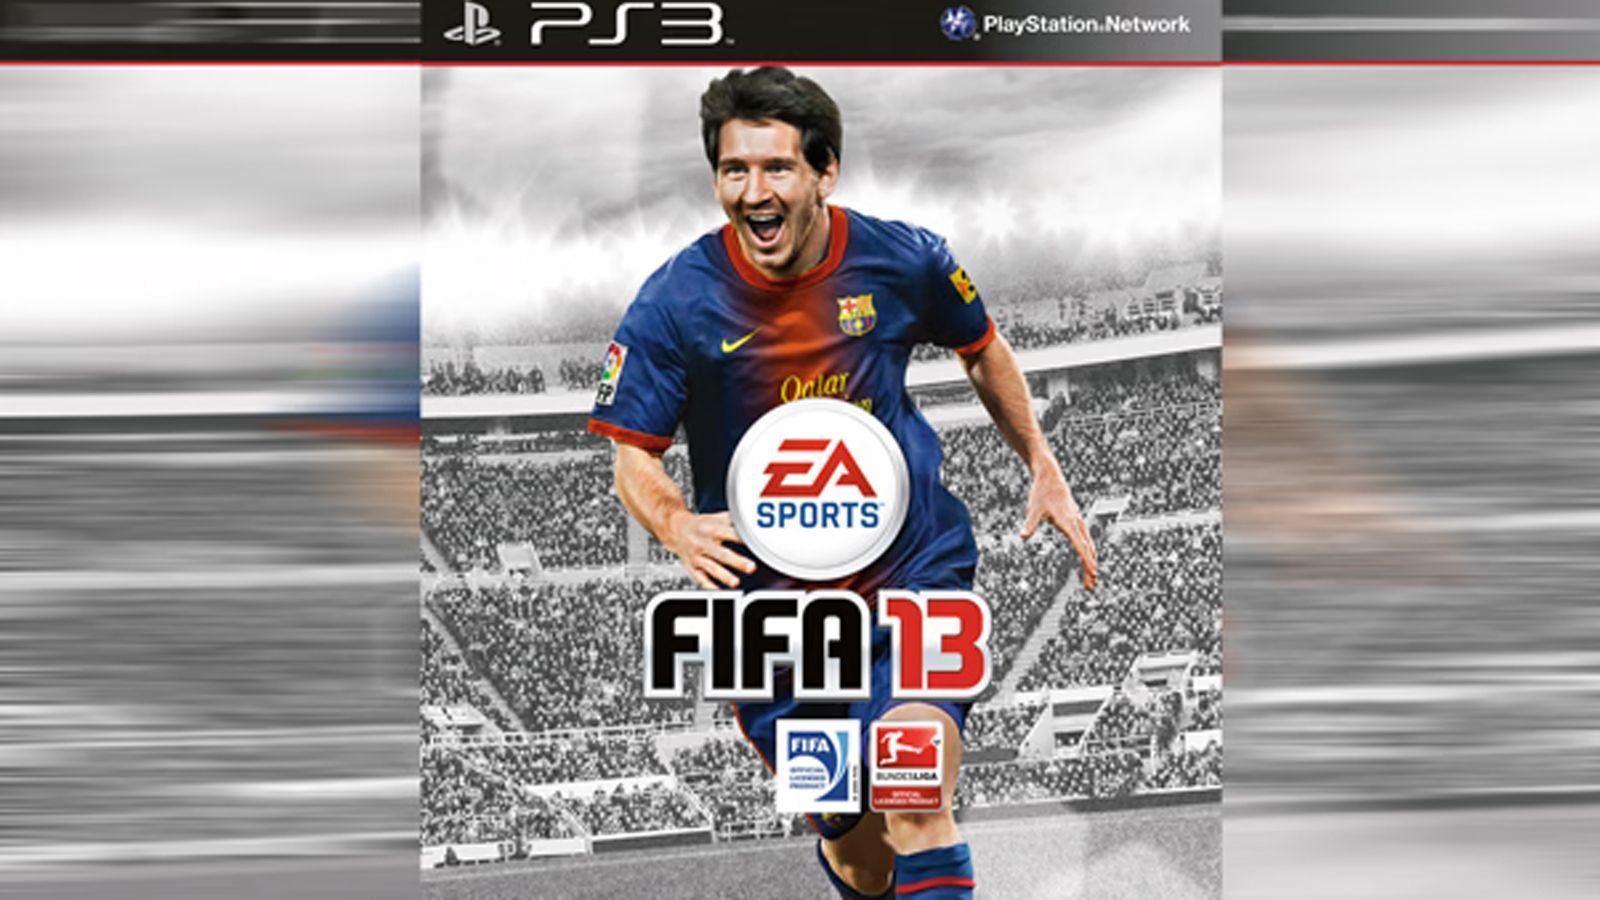 
                <strong>FIFA 13</strong><br>
                FIFA 13 - Cover-Spieler: Lionel Messi.
              